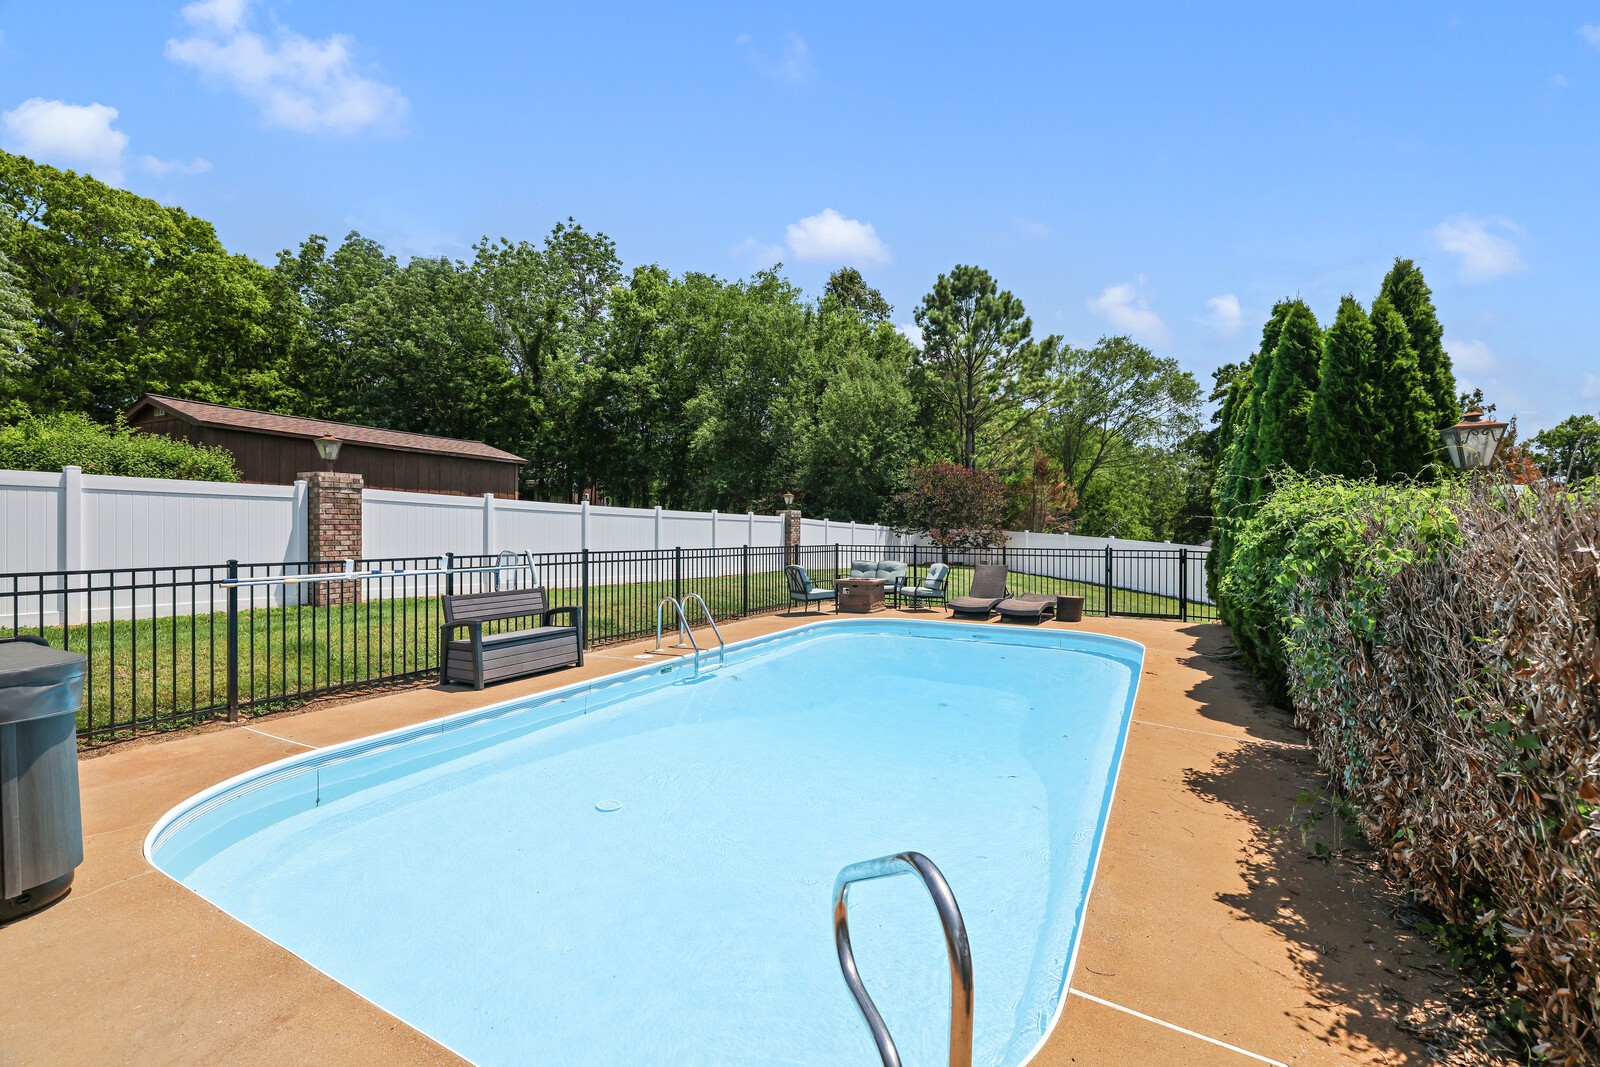 a view of a backyard with swimming pool and trees in the background